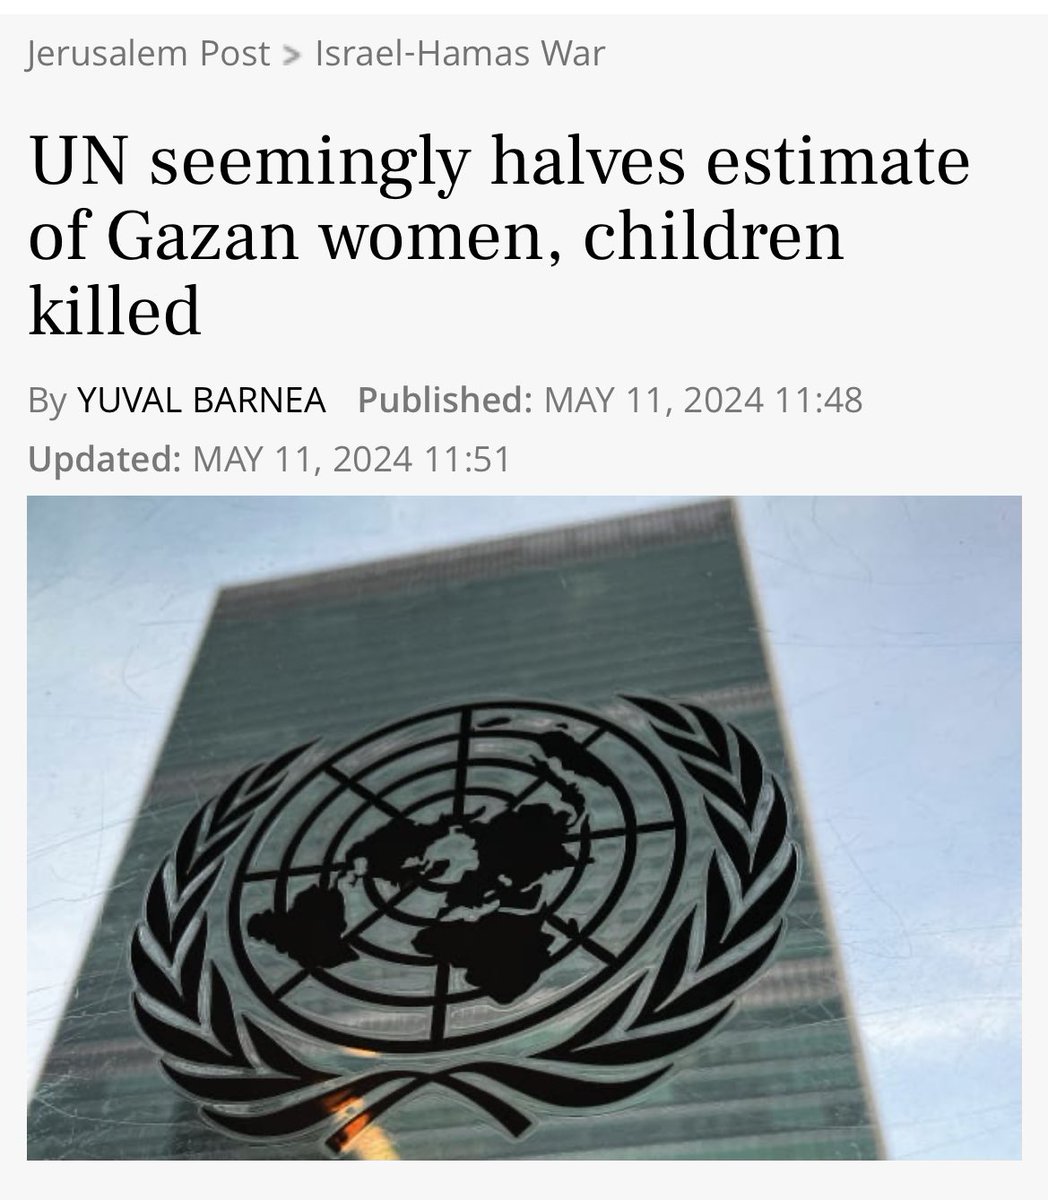 On May 6, the UN published data showing that 34,735 people had reportedly been killed in Gaza, including over 9,500 women and over 14,500 children. On May 8, the UN published data showing 34,844 people had reportedly been killed, including 4,959 women and 7,797 children.…